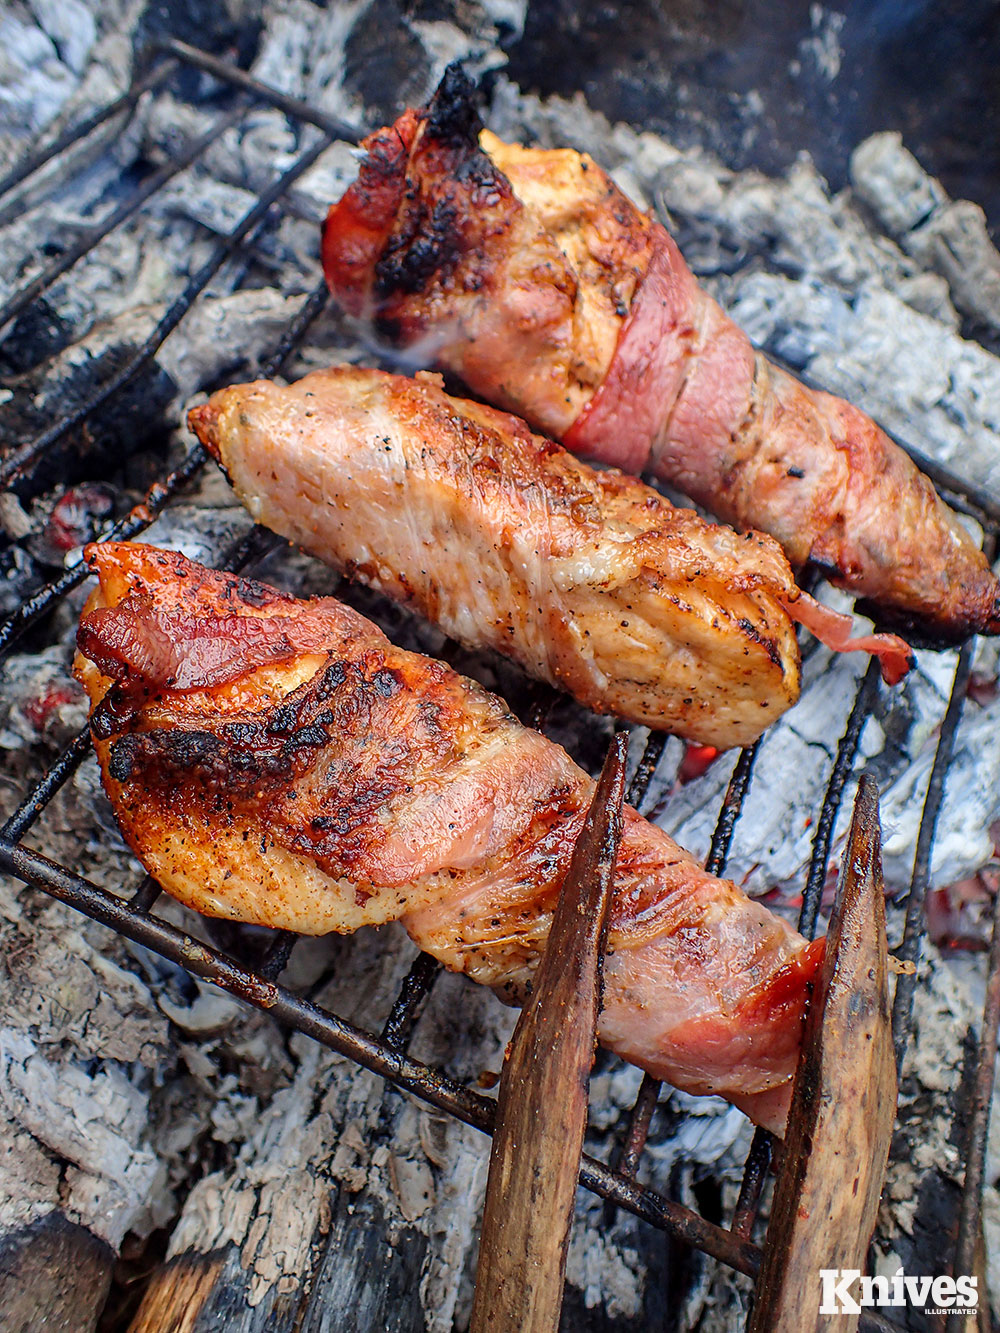 Coal cooking bacon-wrapped chicken breasts. A small grill can be placed directly on the coals for uniform cooking.